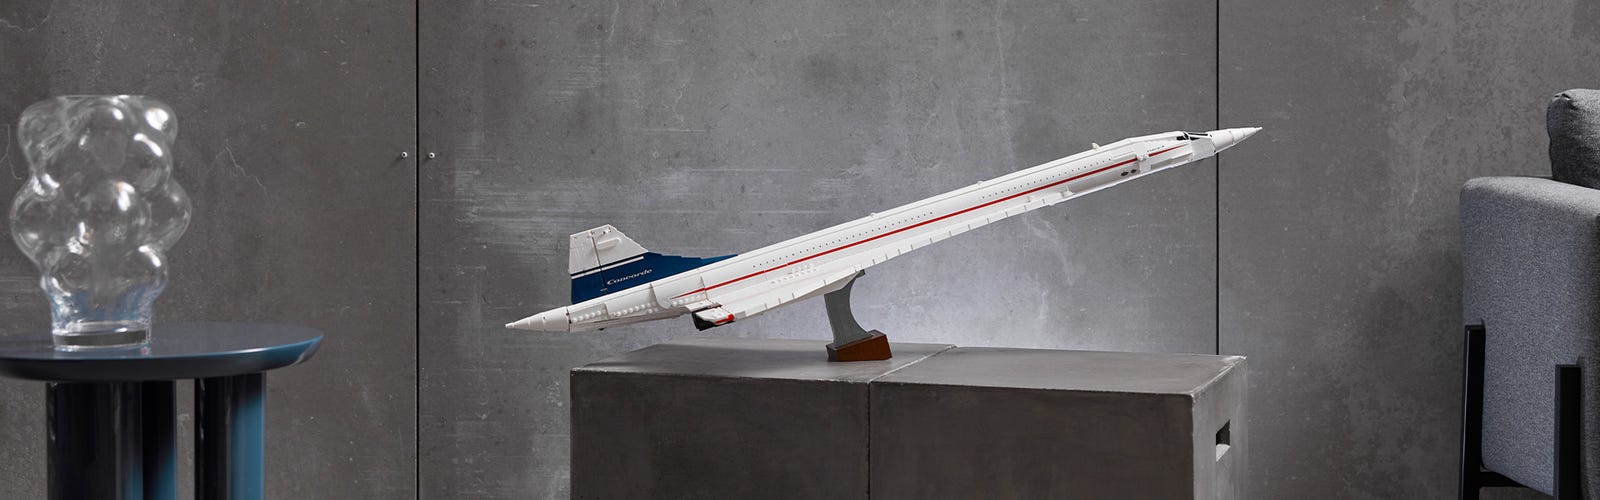 Why the Concorde is an engineering masterpiece